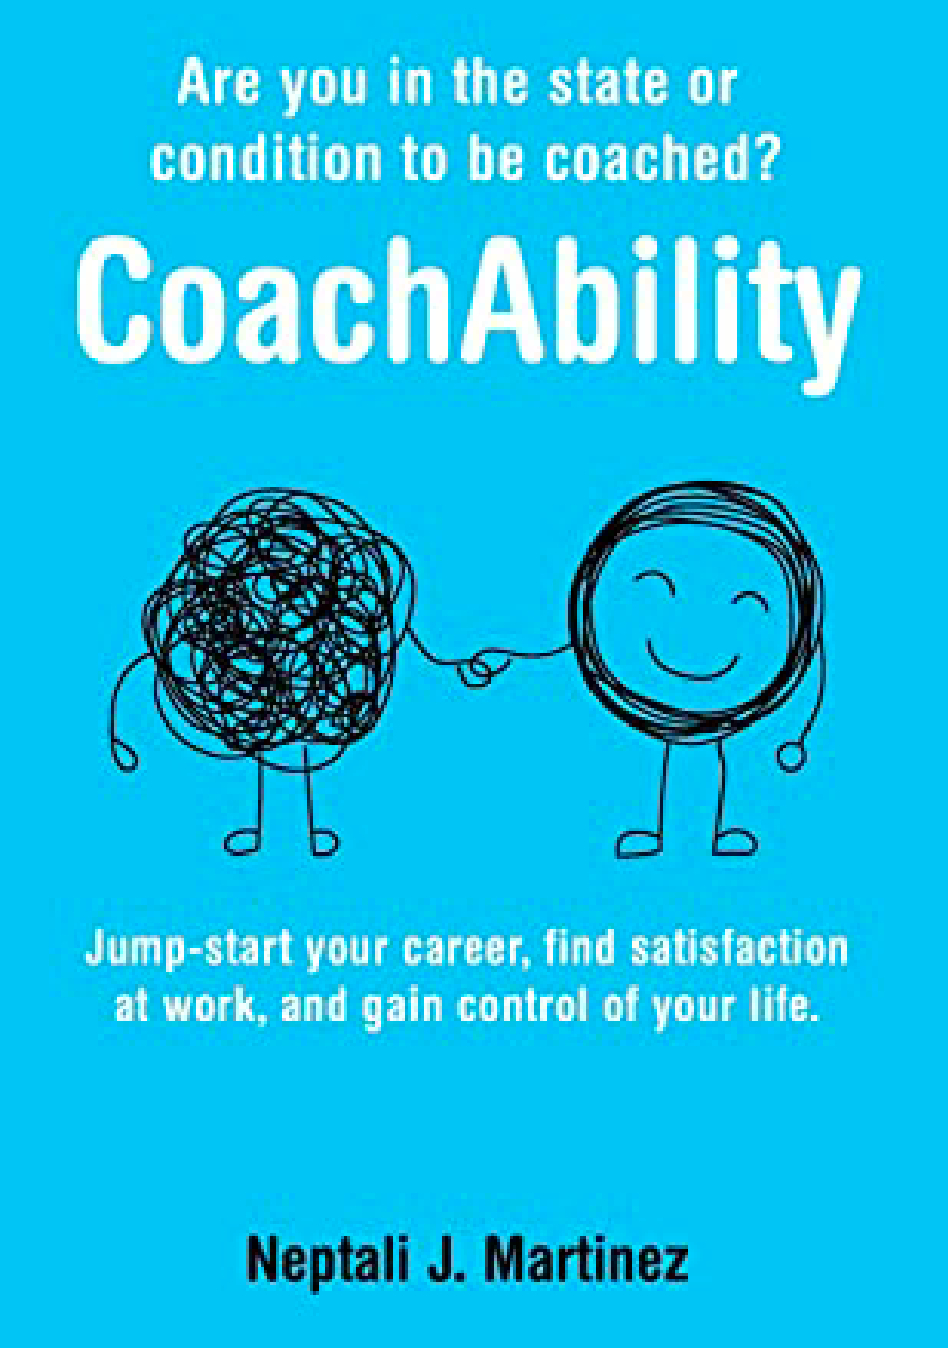 CoachAbility: Are you in the state or condition to be coached